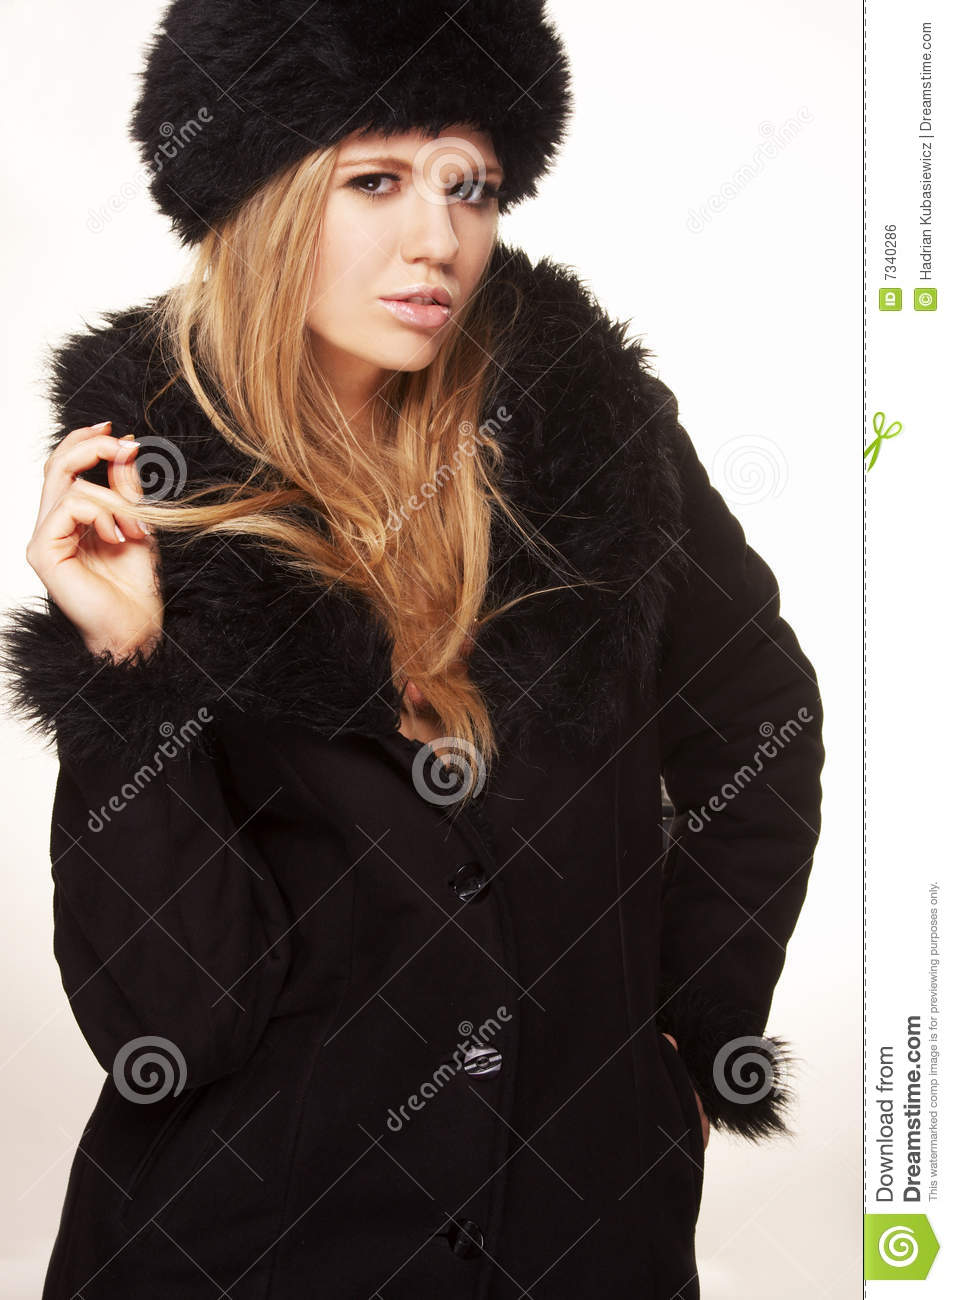 Woman In Black Fur Hat And Coat Royalty Free Stock Image   Image